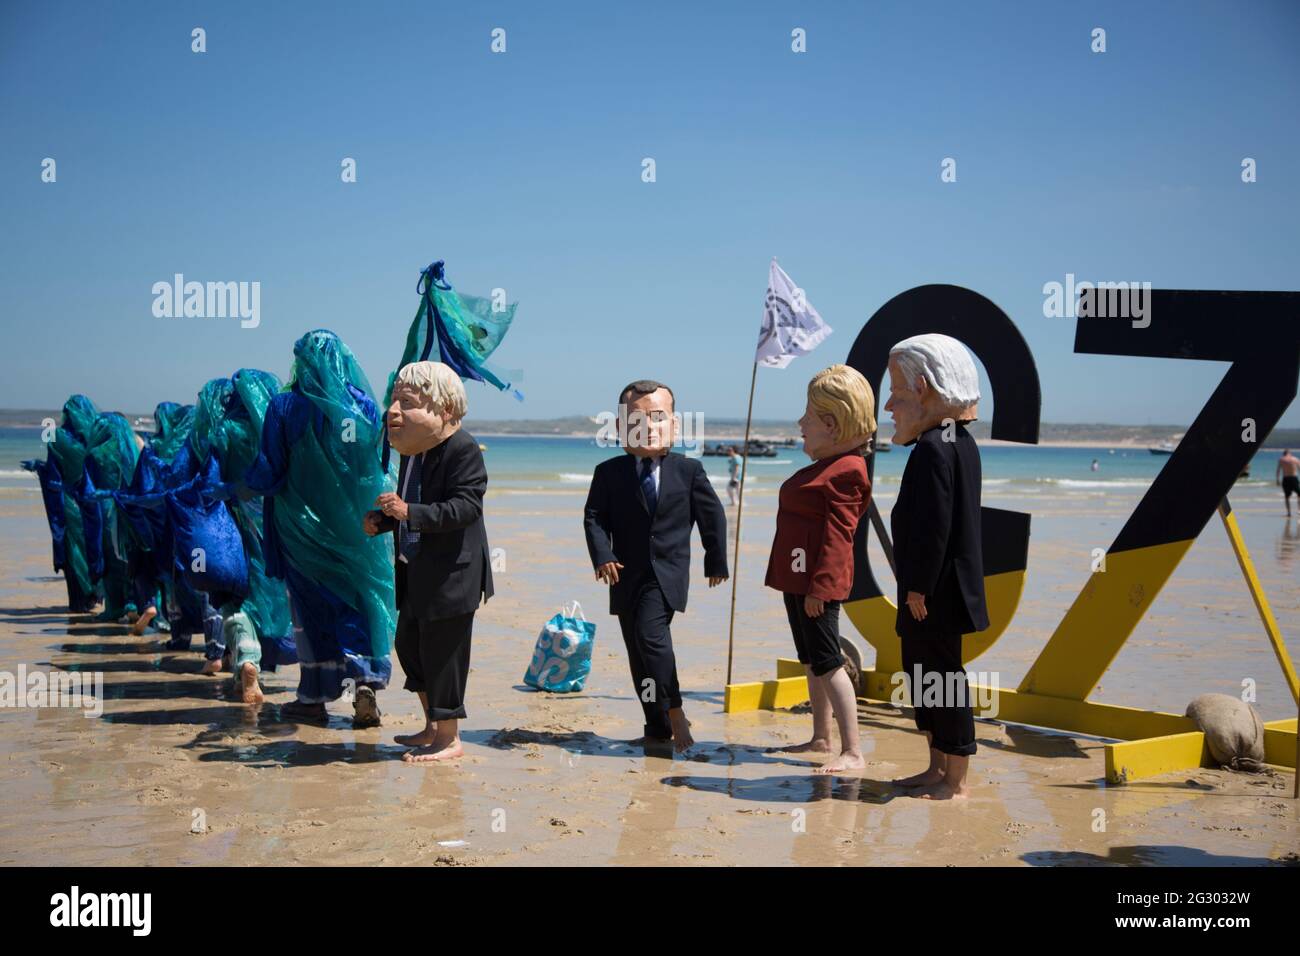 St Ives, UK. 13th June 2021. Extinction Rebellion activists dressed as G7 leaders protest with the Ocean Rebels on Porthminster Beach, St Ives, on the final day of the G7 Summit when climate change dominated the agenda. Credit: Sarah Peters/Alamy Live News Stock Photo